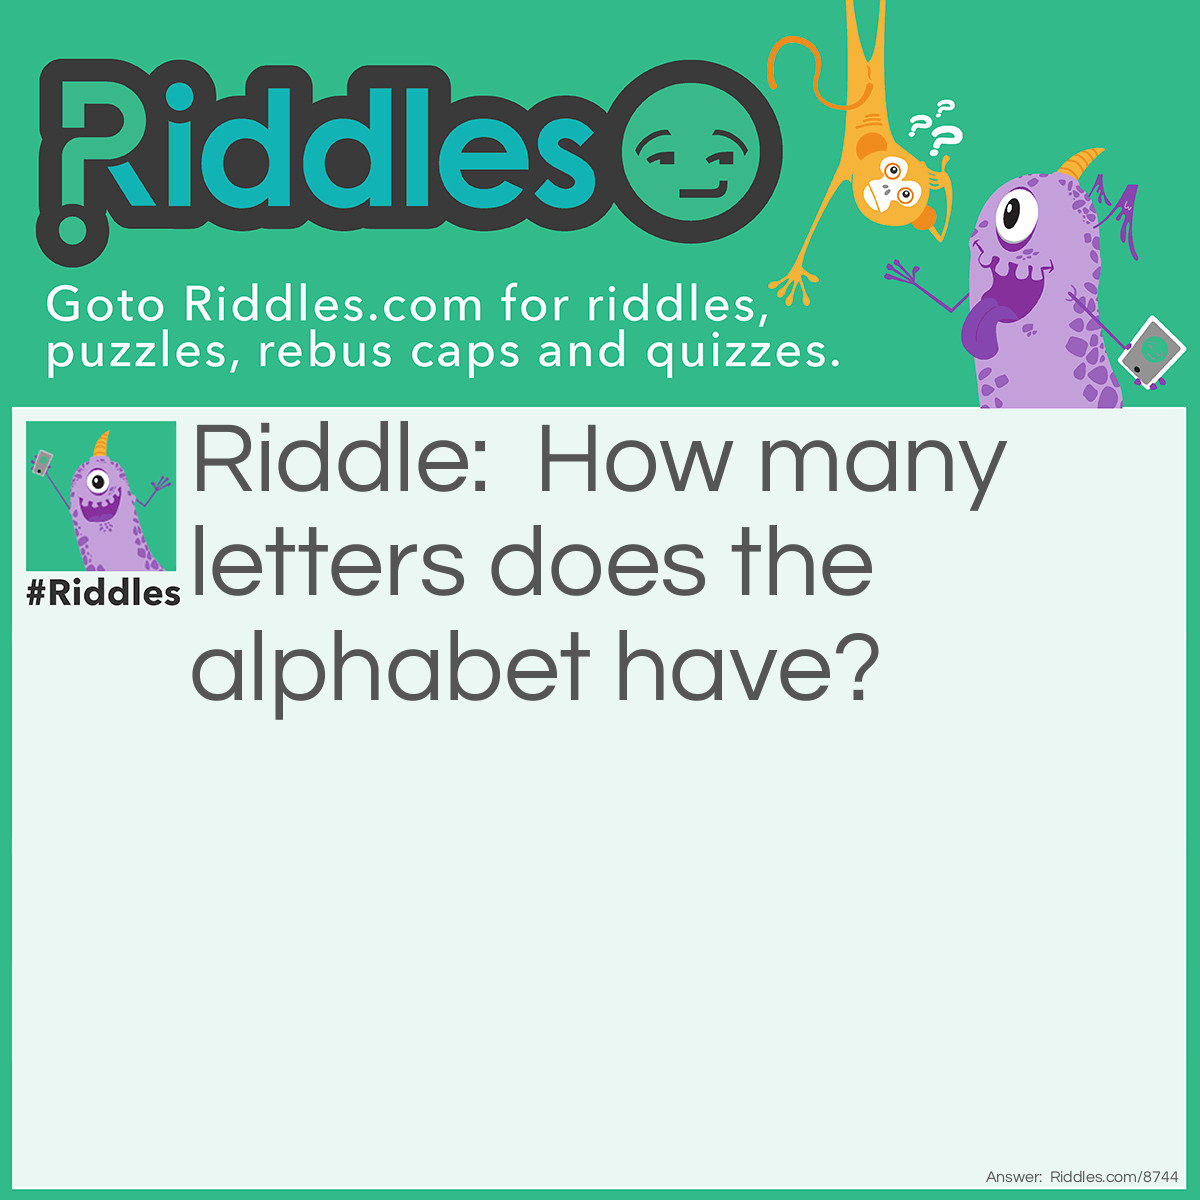 Riddle: How many letters does the alphabet have? Answer: 11. T-H-E A-L-P-H-A-B-E-T